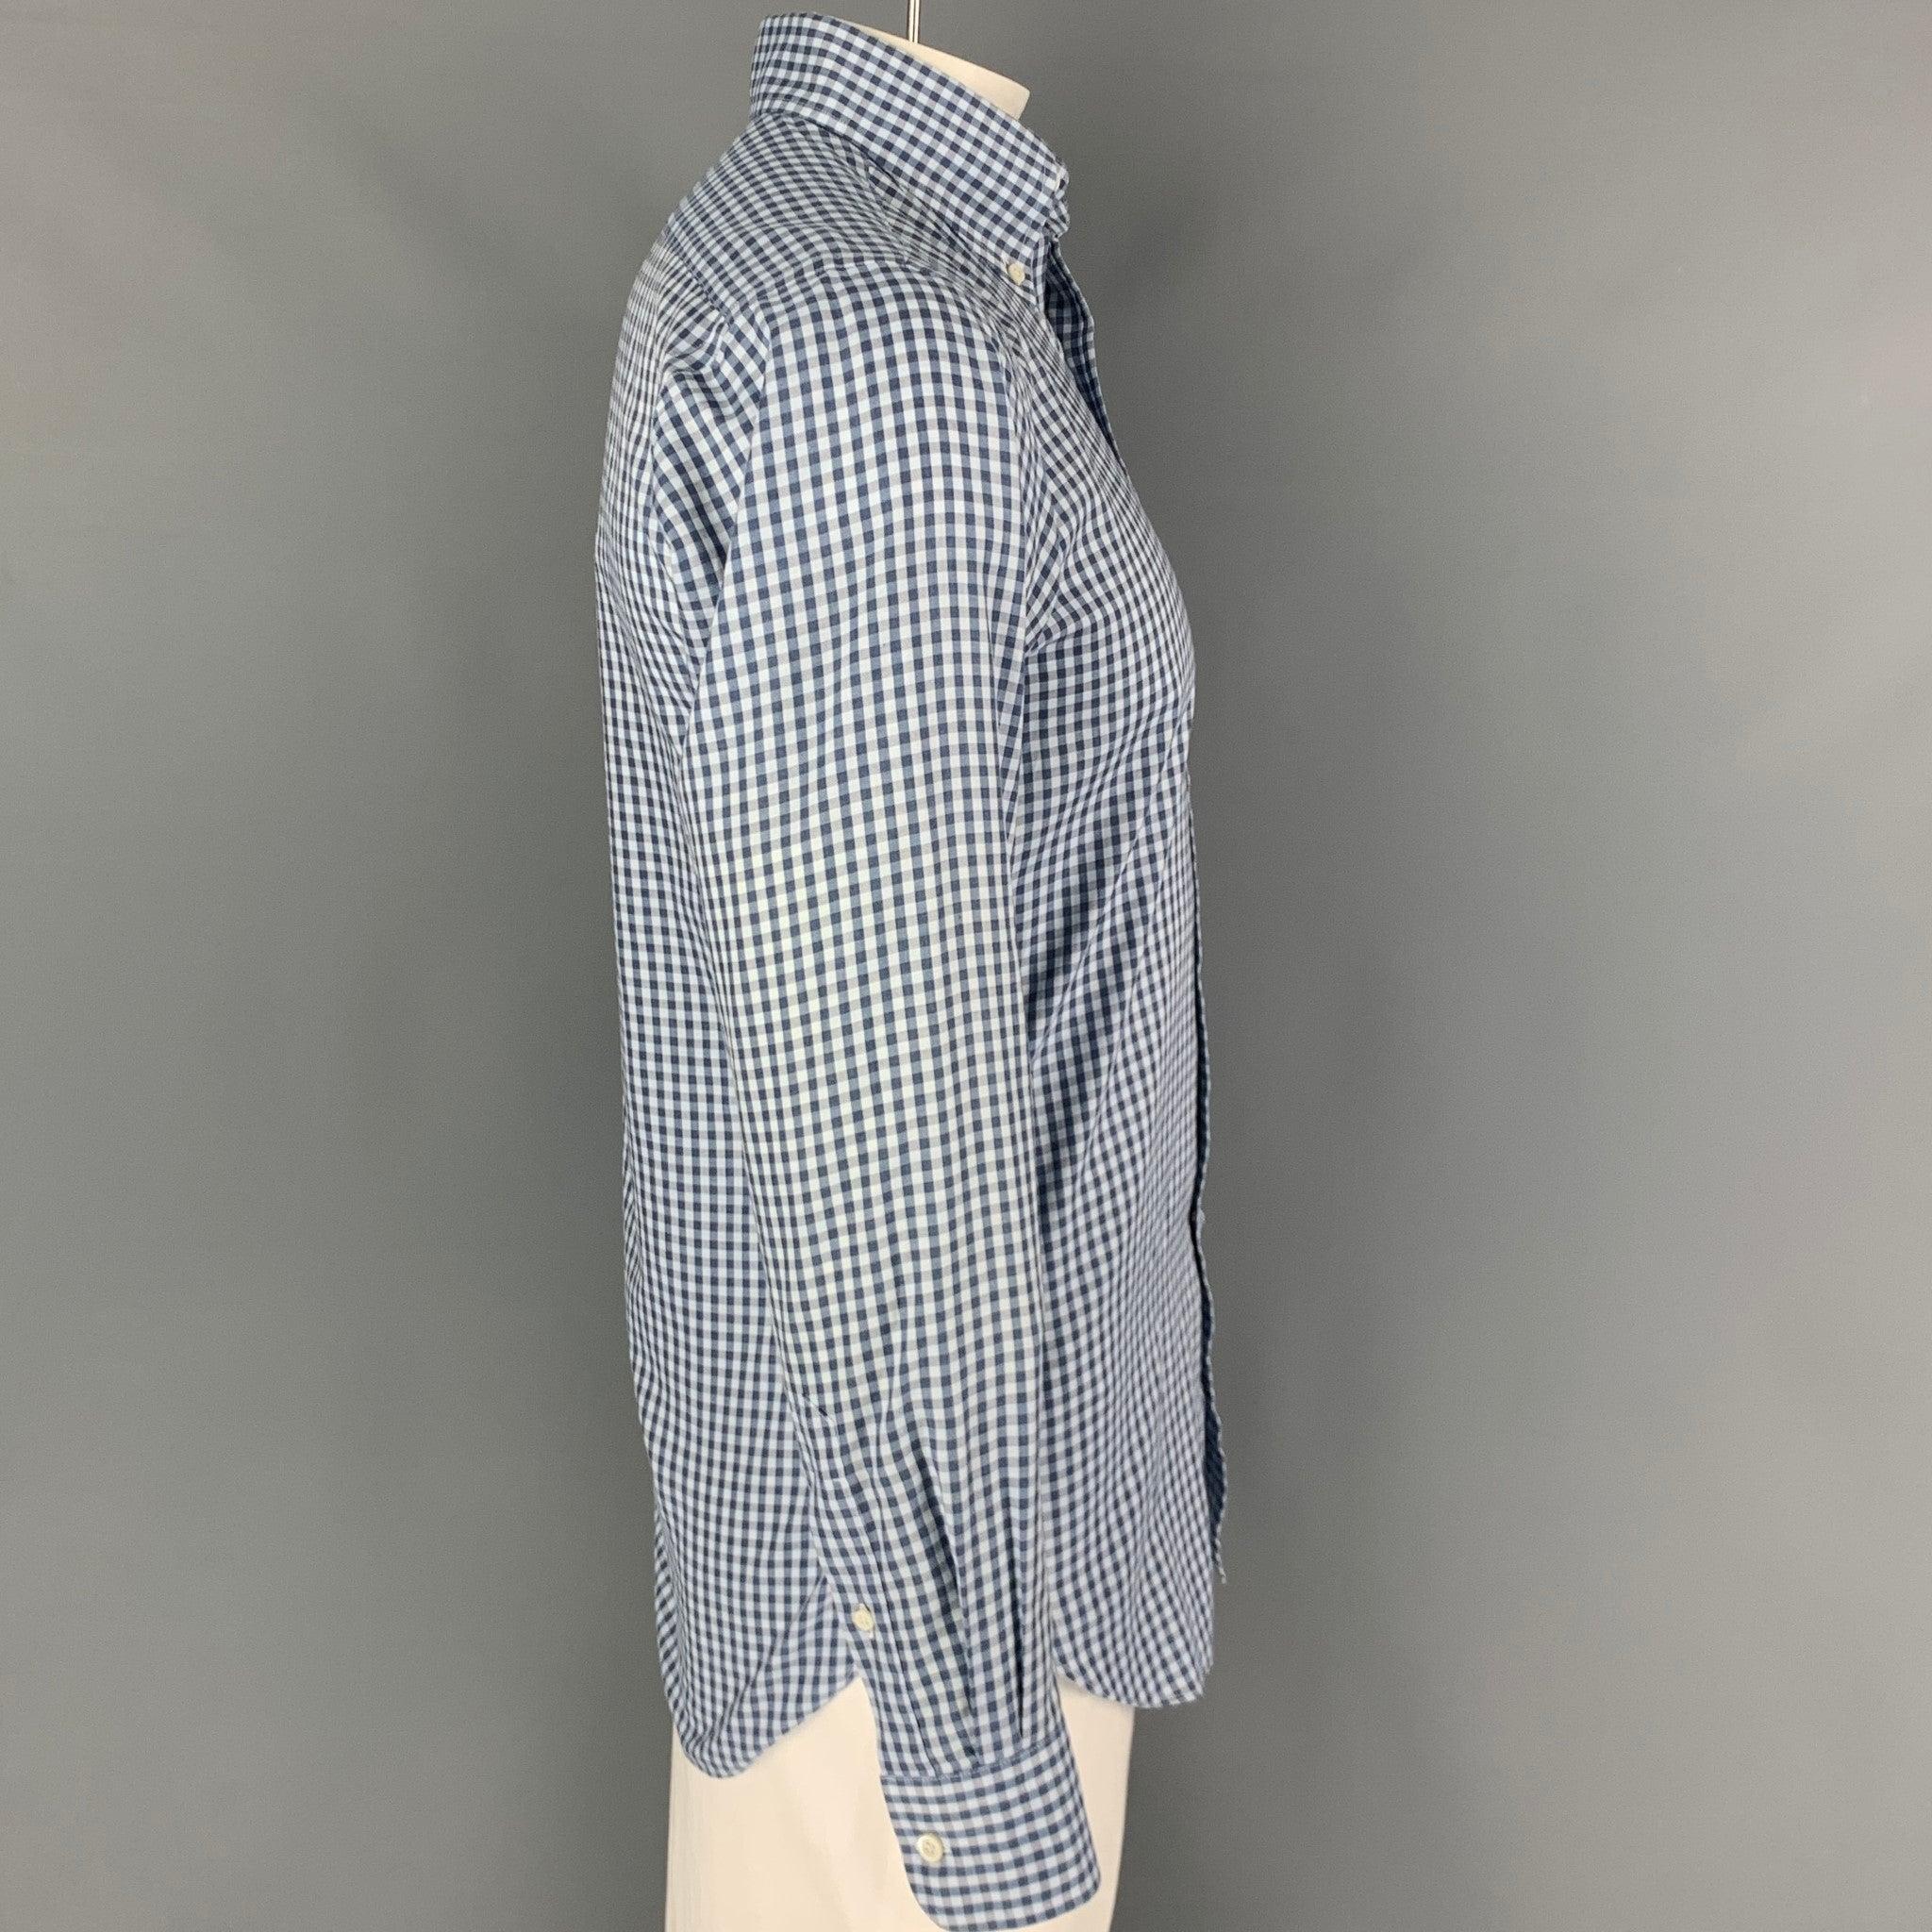 HAMILTON long sleeve shirt comes in a blue & light blue gingham material featuring a classic style, button down collar, and a button up closure. Excellent
Pre-Owned Condition. Fabric tag removed.  

Marked:   MARCH18  

Measurements: 
 
Shoulder: 18